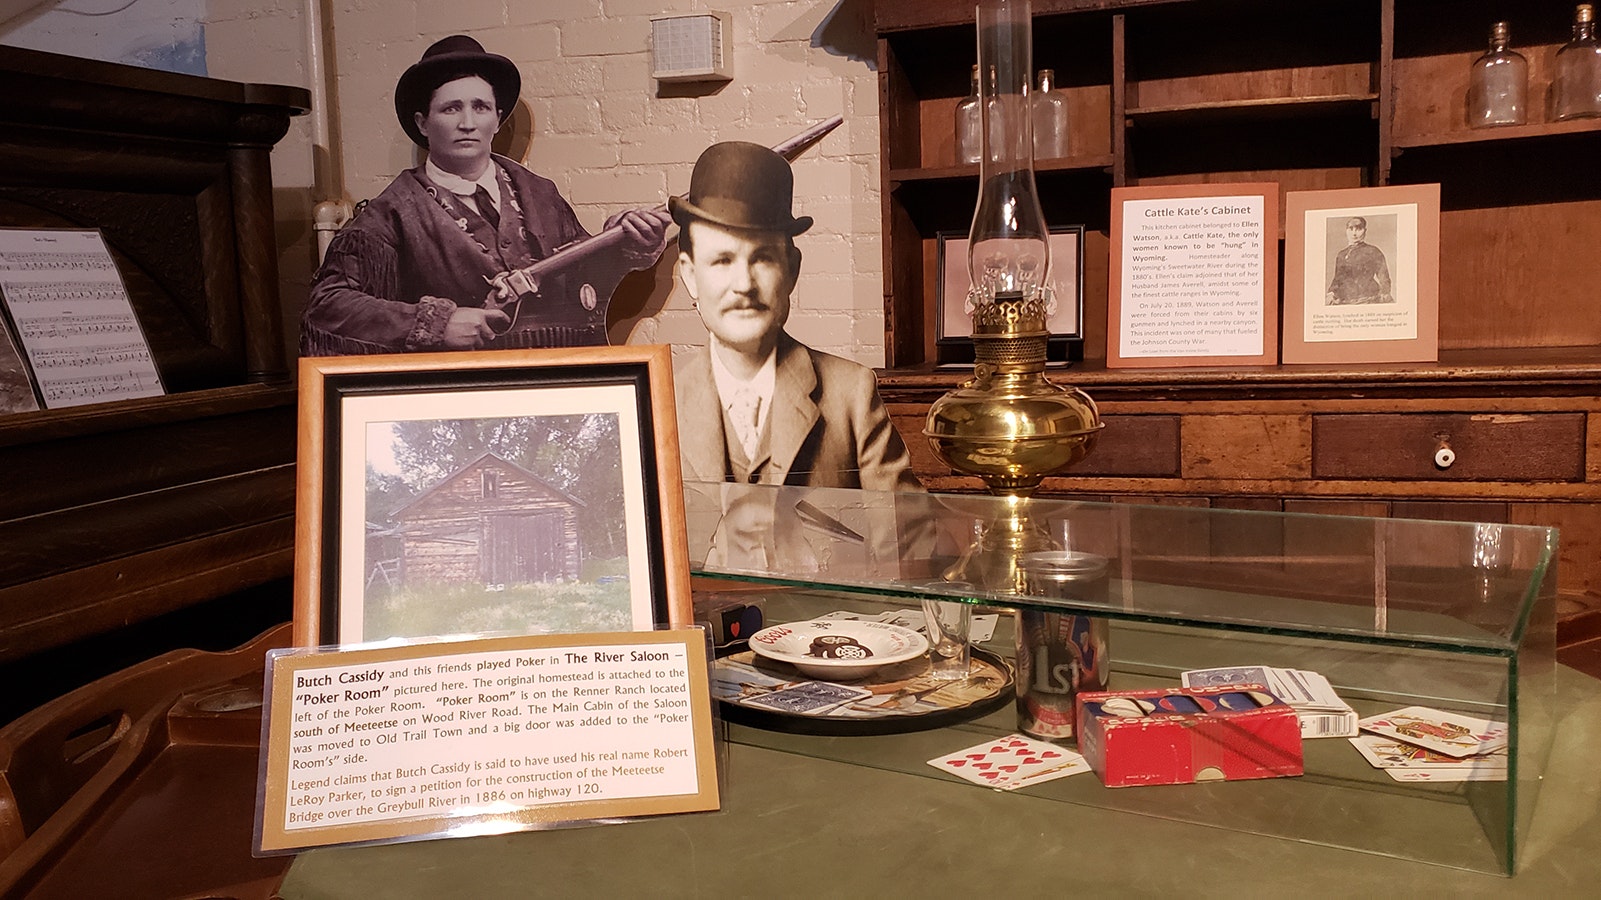 Butch Cassidy and his friends played poker in the River Saloon's Poker Room in Thermopolis, Wyoming. The display recreates what the inside of the pictured cabin might have looked like, but also includes "Cattle Kate's" cabinet.